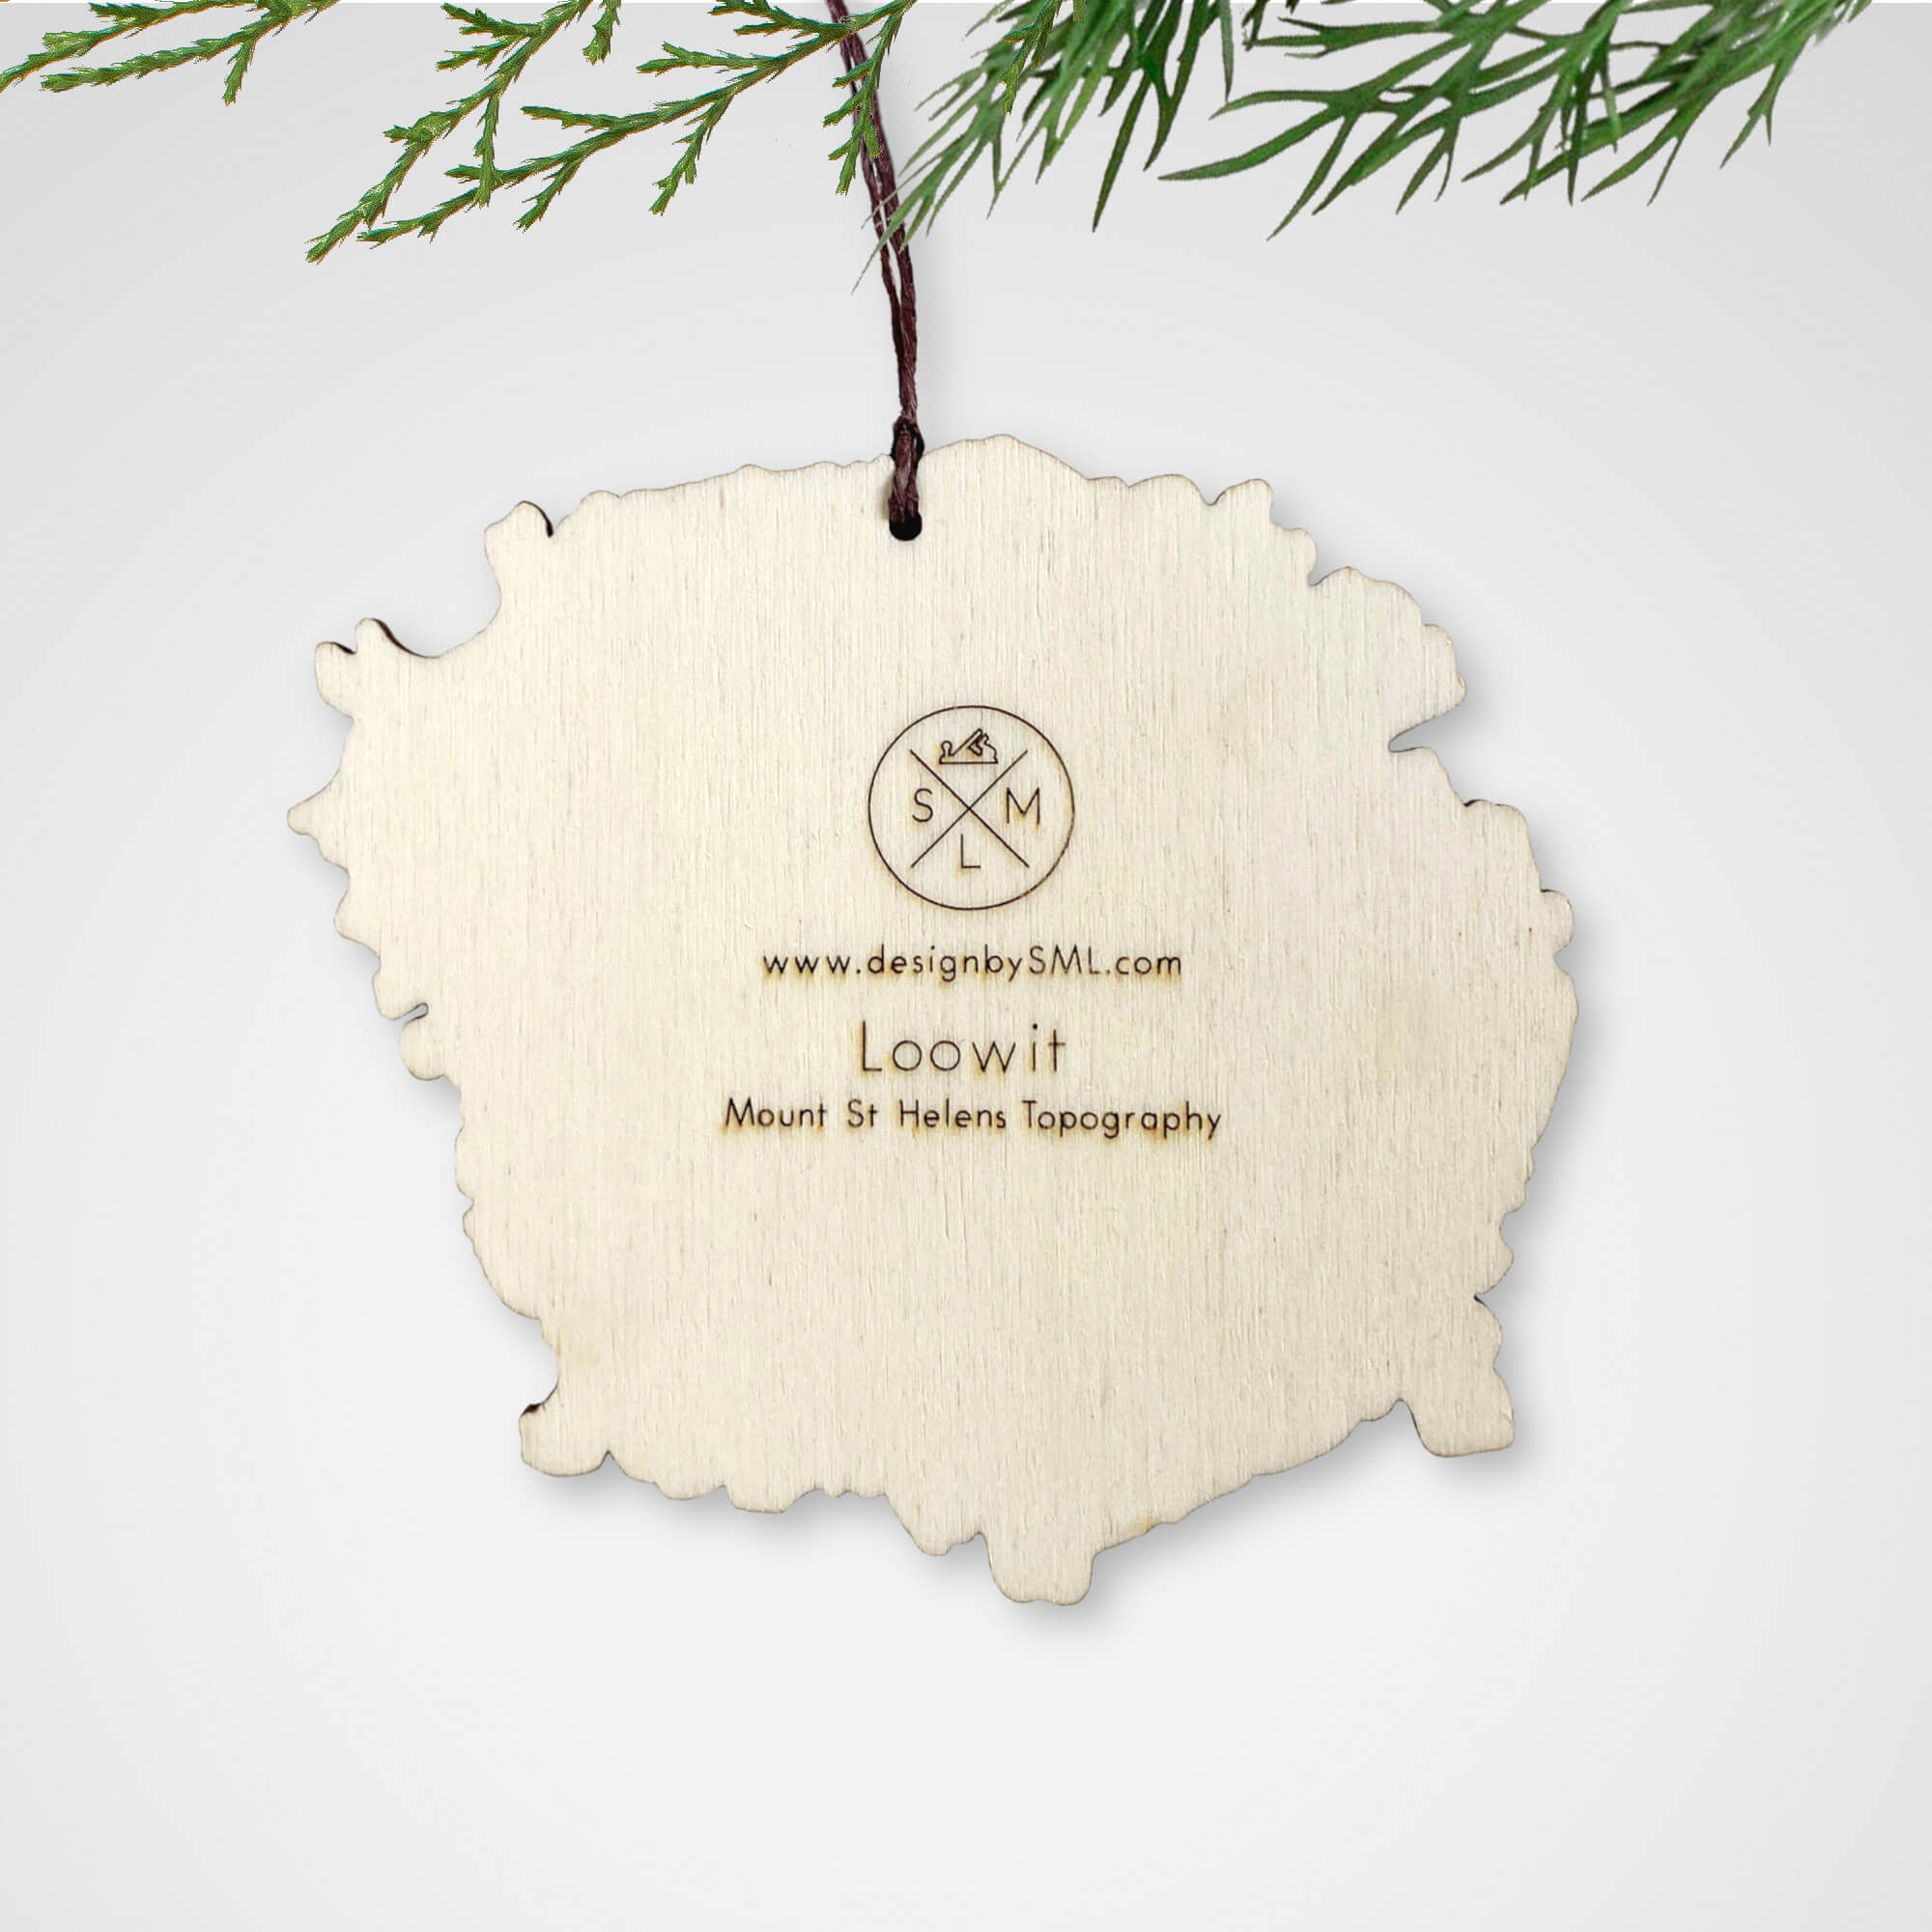 Mt St Helens Topography Ornament